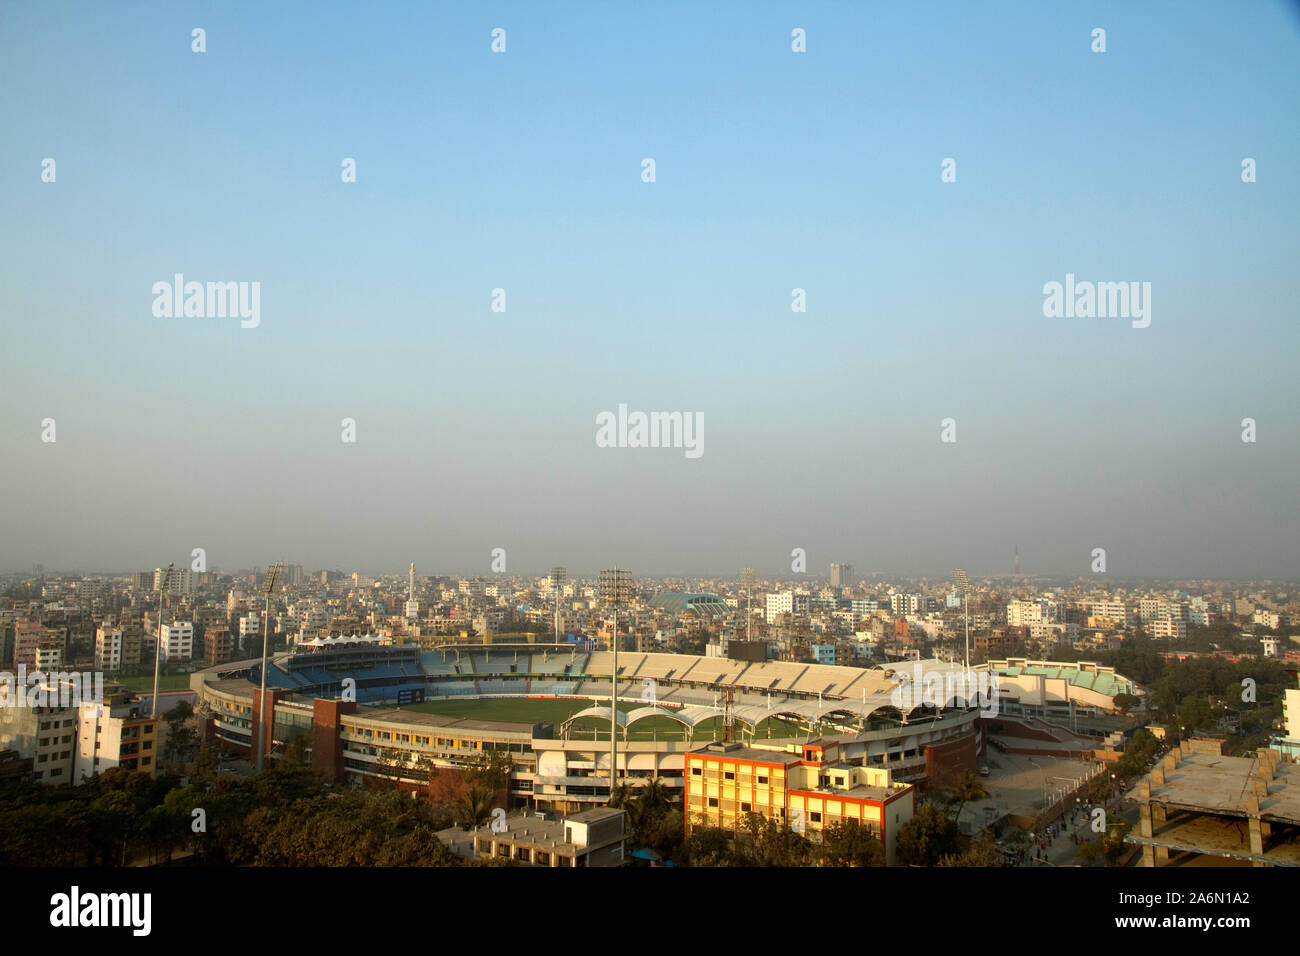 A top view of Sher-e-Bangla National Stadium in Mirpur, Dhaka, the main venue of the ICC Cricket World Cup 2011 in Bangladesh. February 12, 2011. Stock Photo